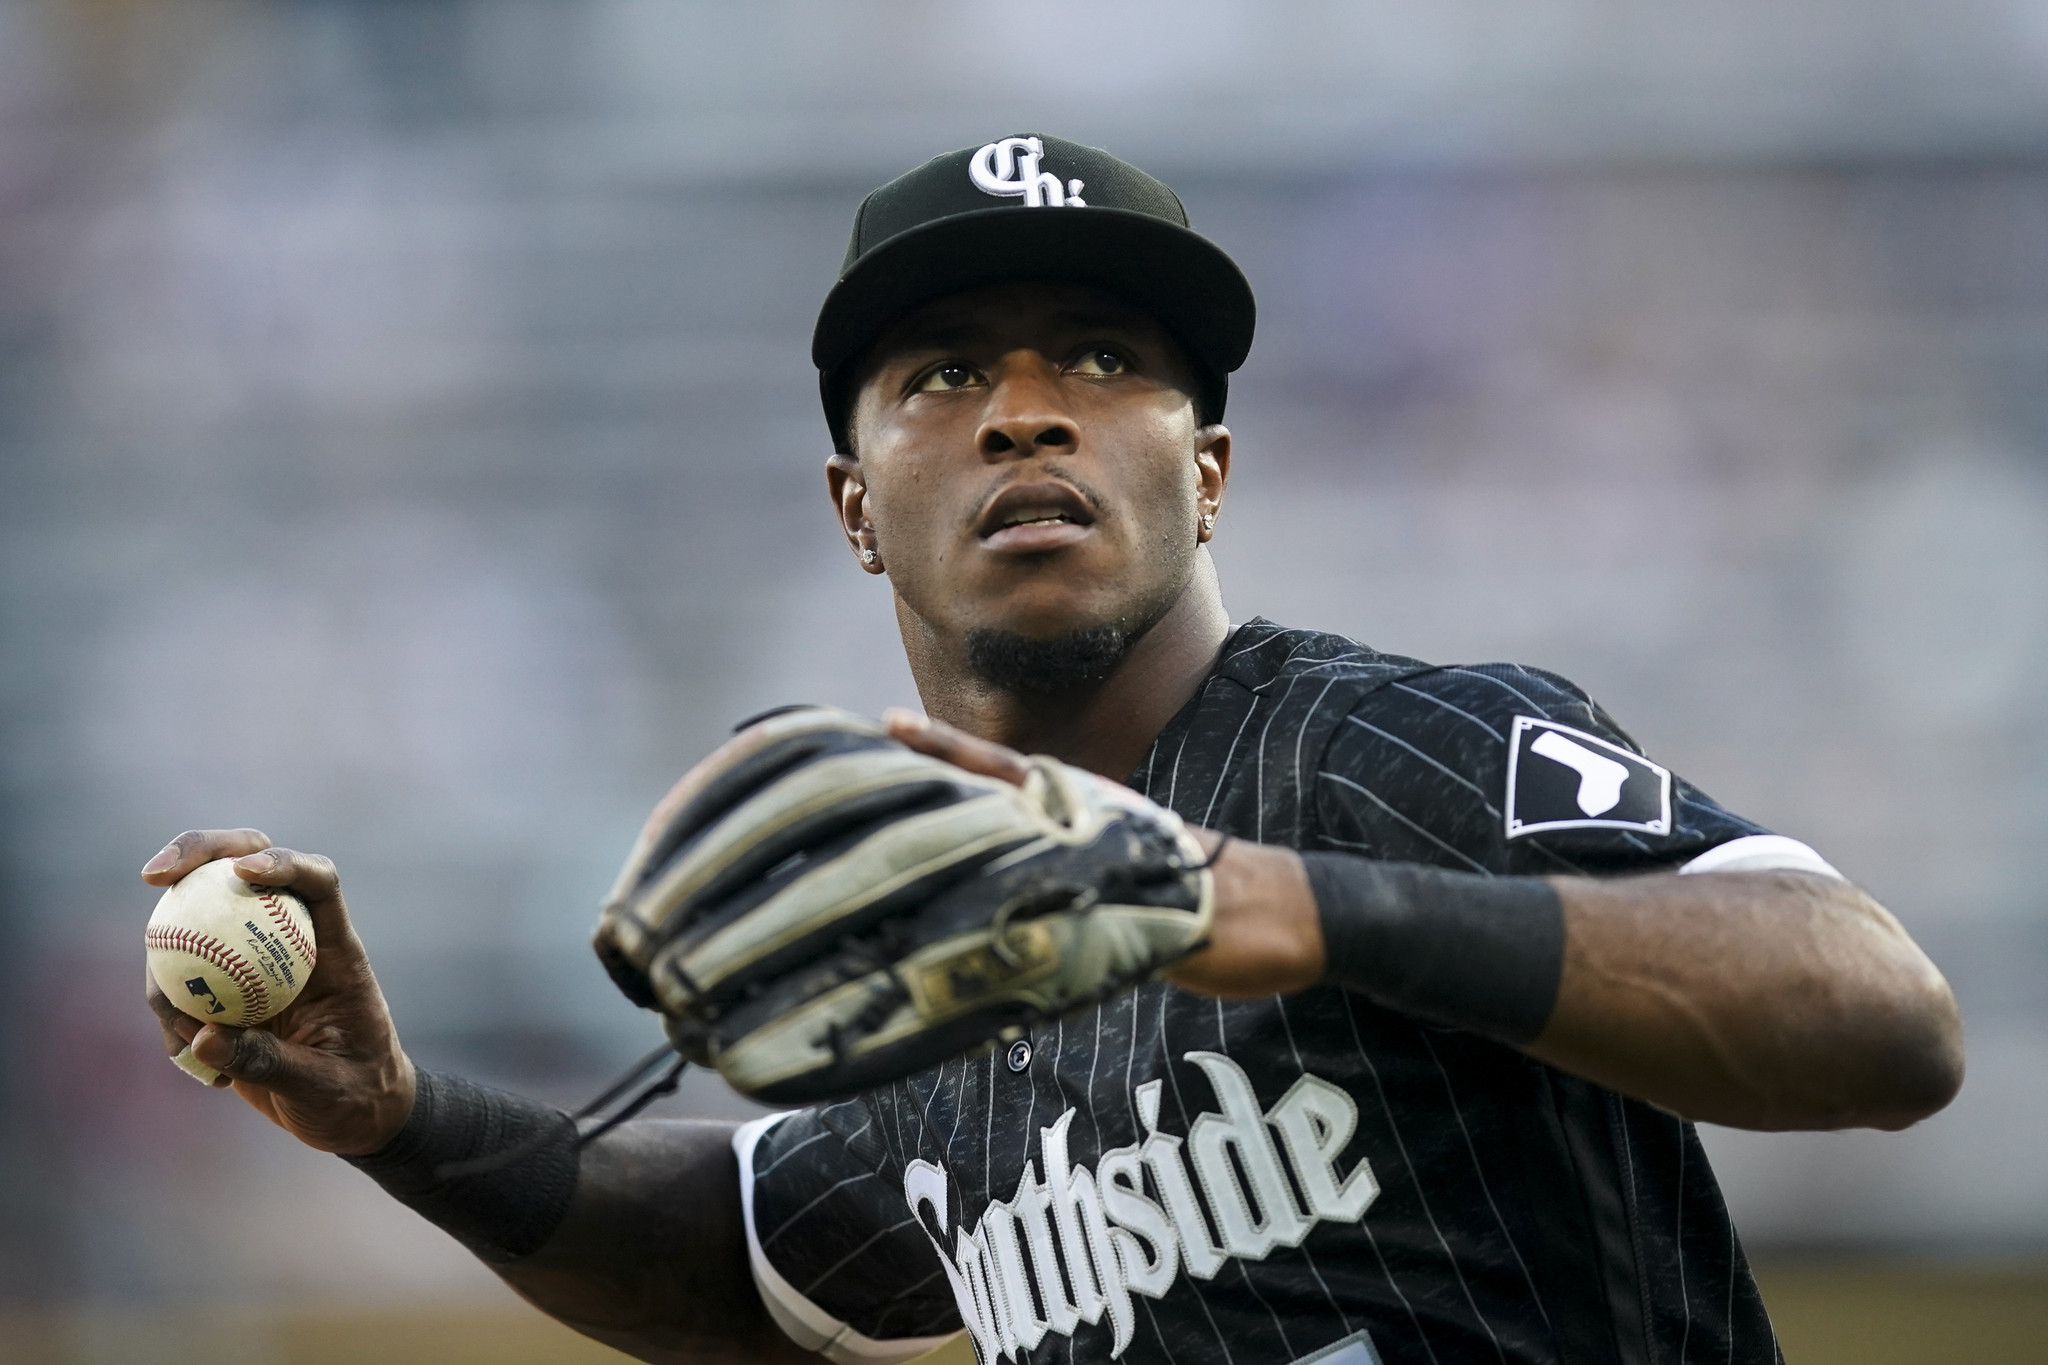 Can White Sox stay afloat until Jimenez, Robert return from injuries?